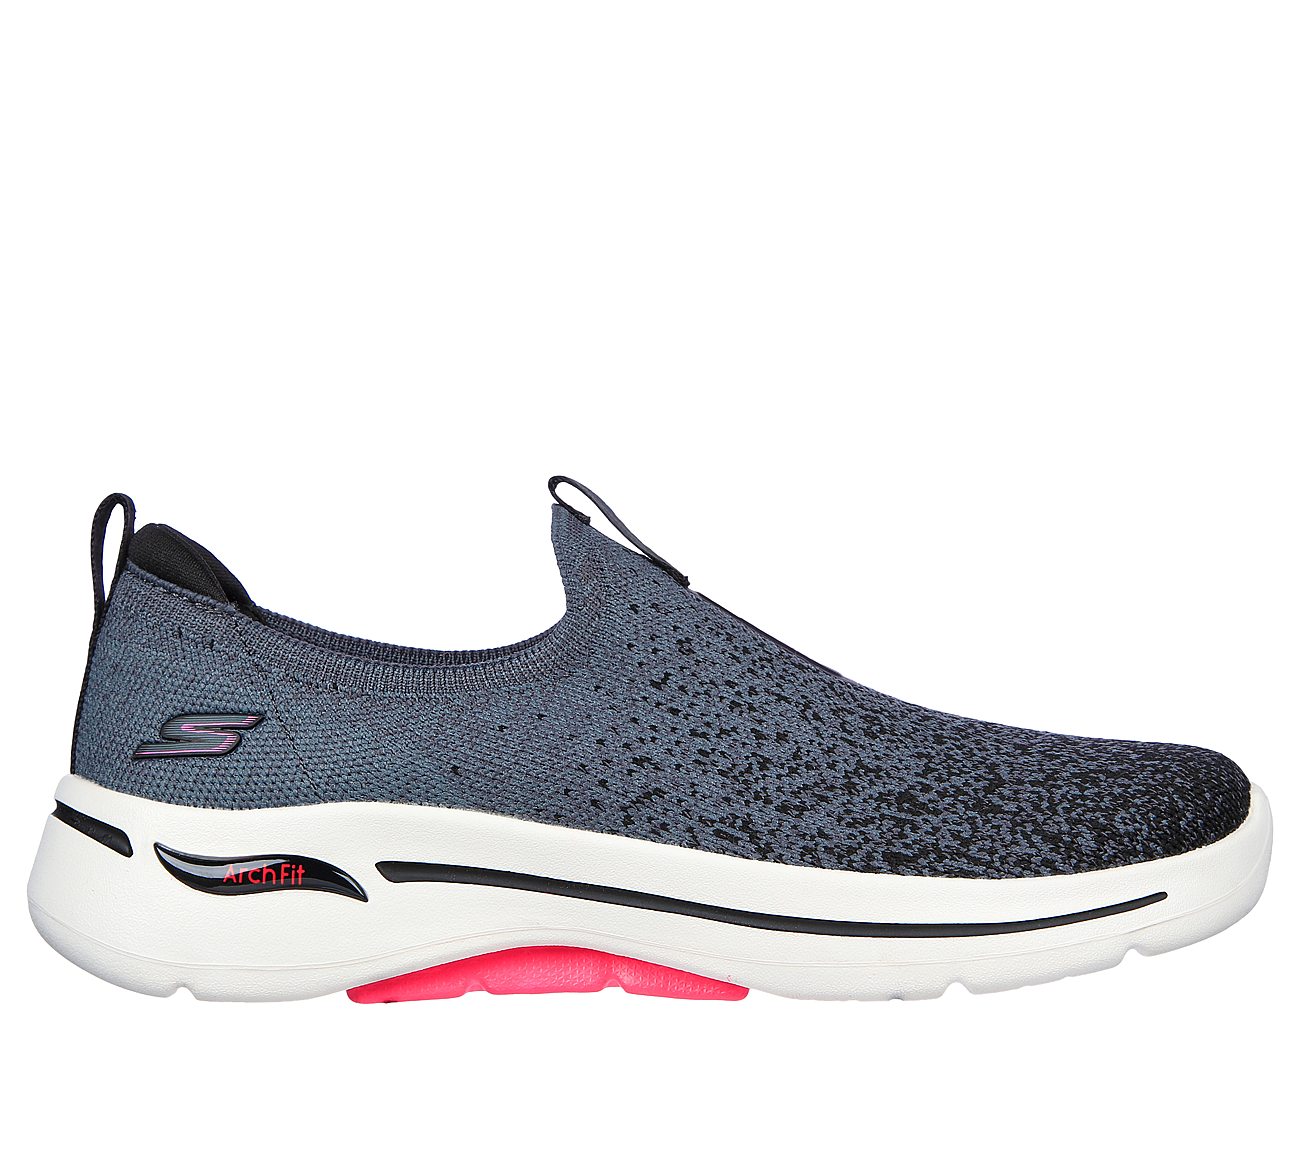 GO WALK ARCH FIT-LUNAR VIEWS, BLACK/HOT PINK Footwear Lateral View